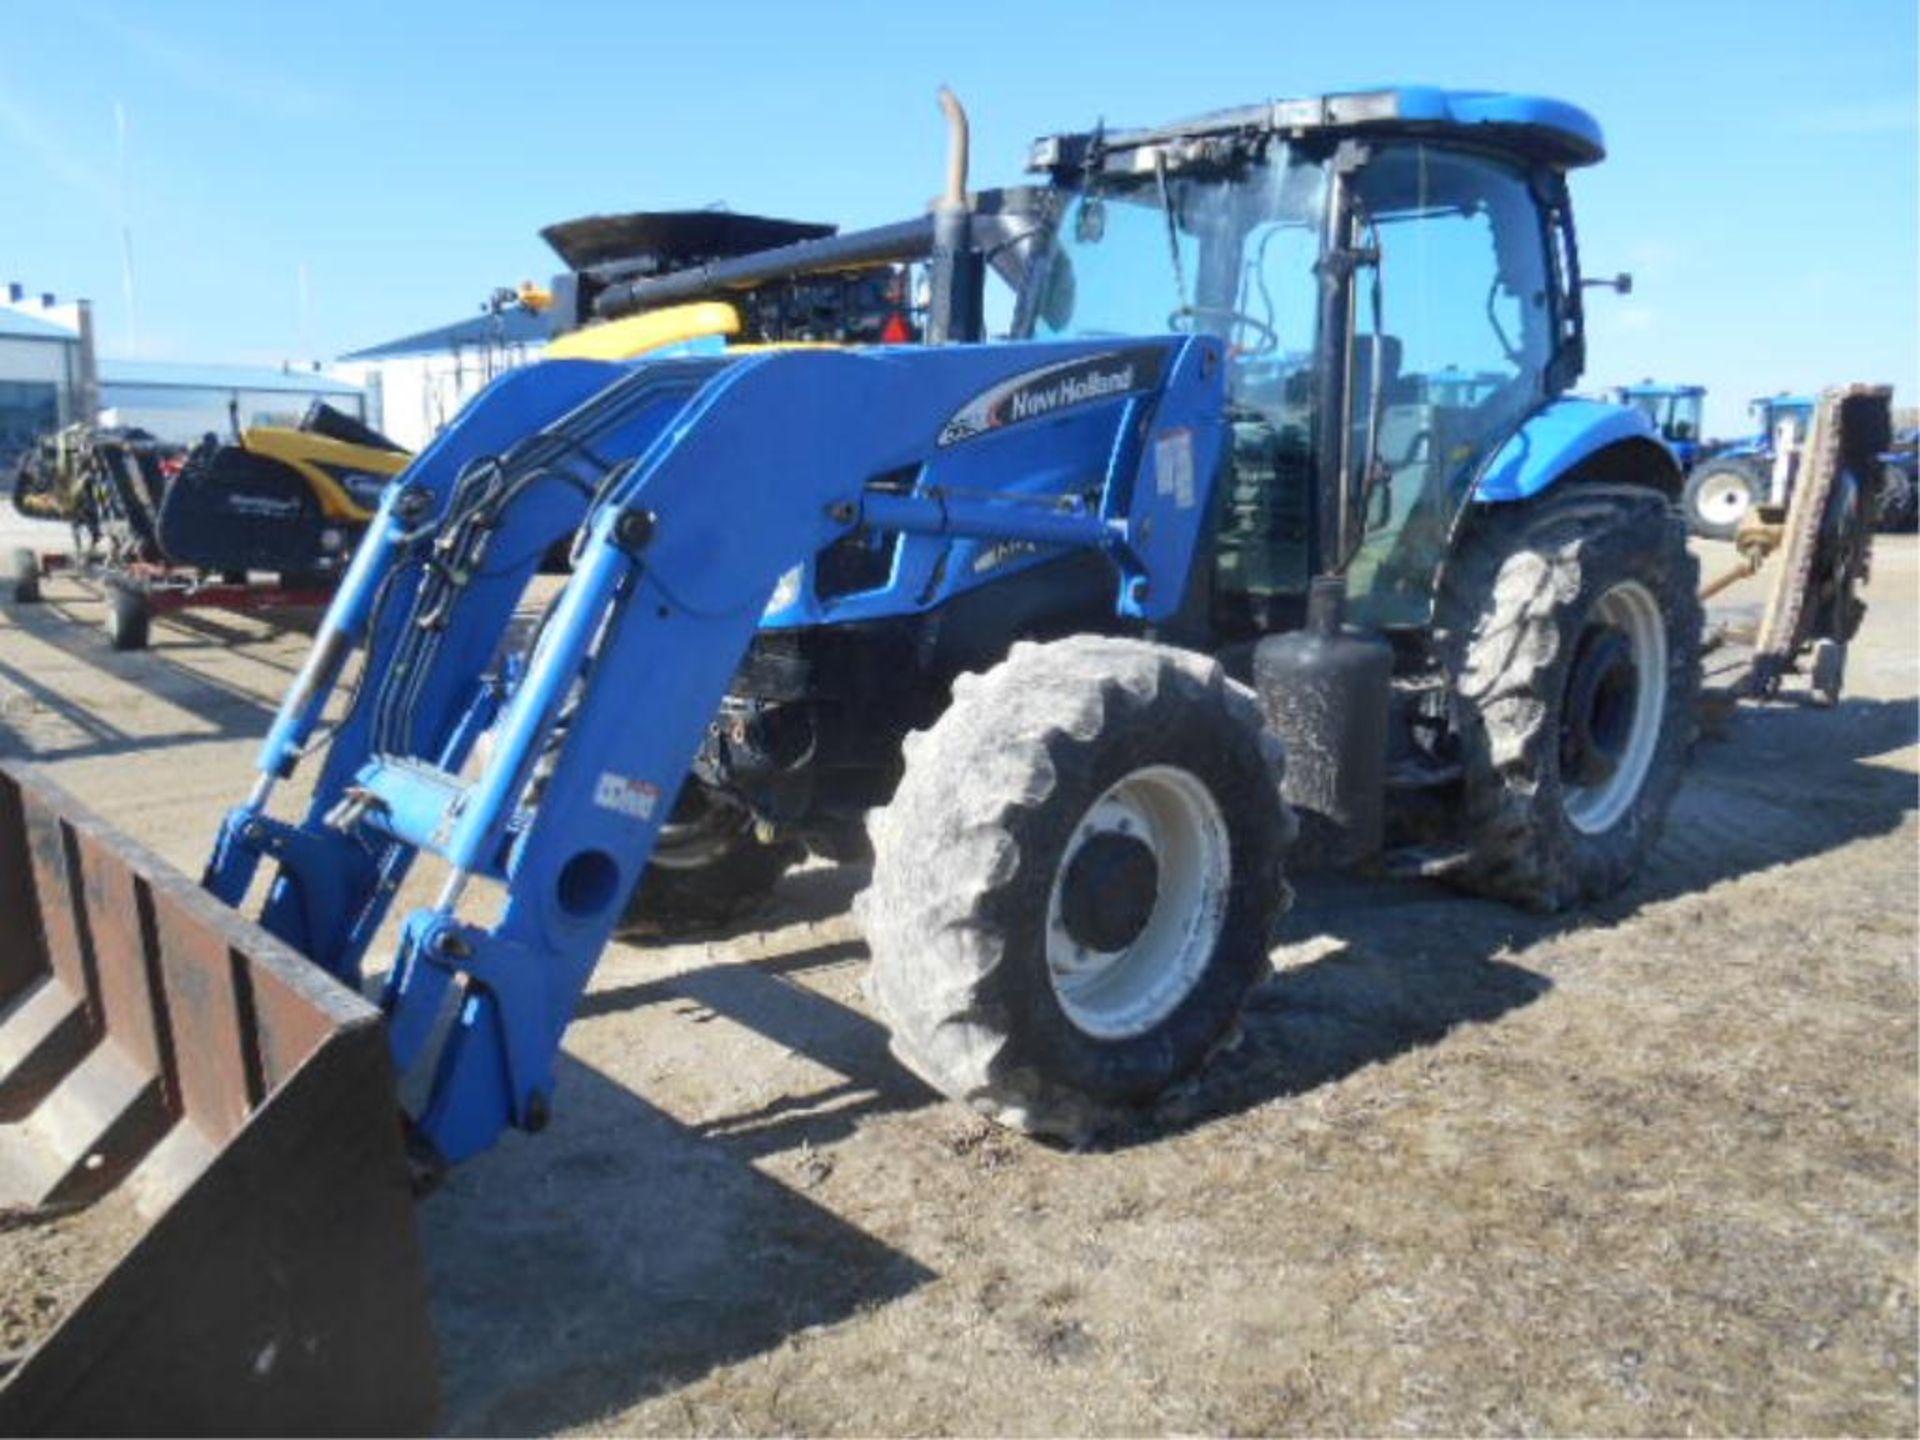 New Holland TS115 Tractor. '06, sn#ACP258890 9523 Hrs, MFWD, Cab, 115 HP, 12/2, 3 Pt, 2 Hyd.